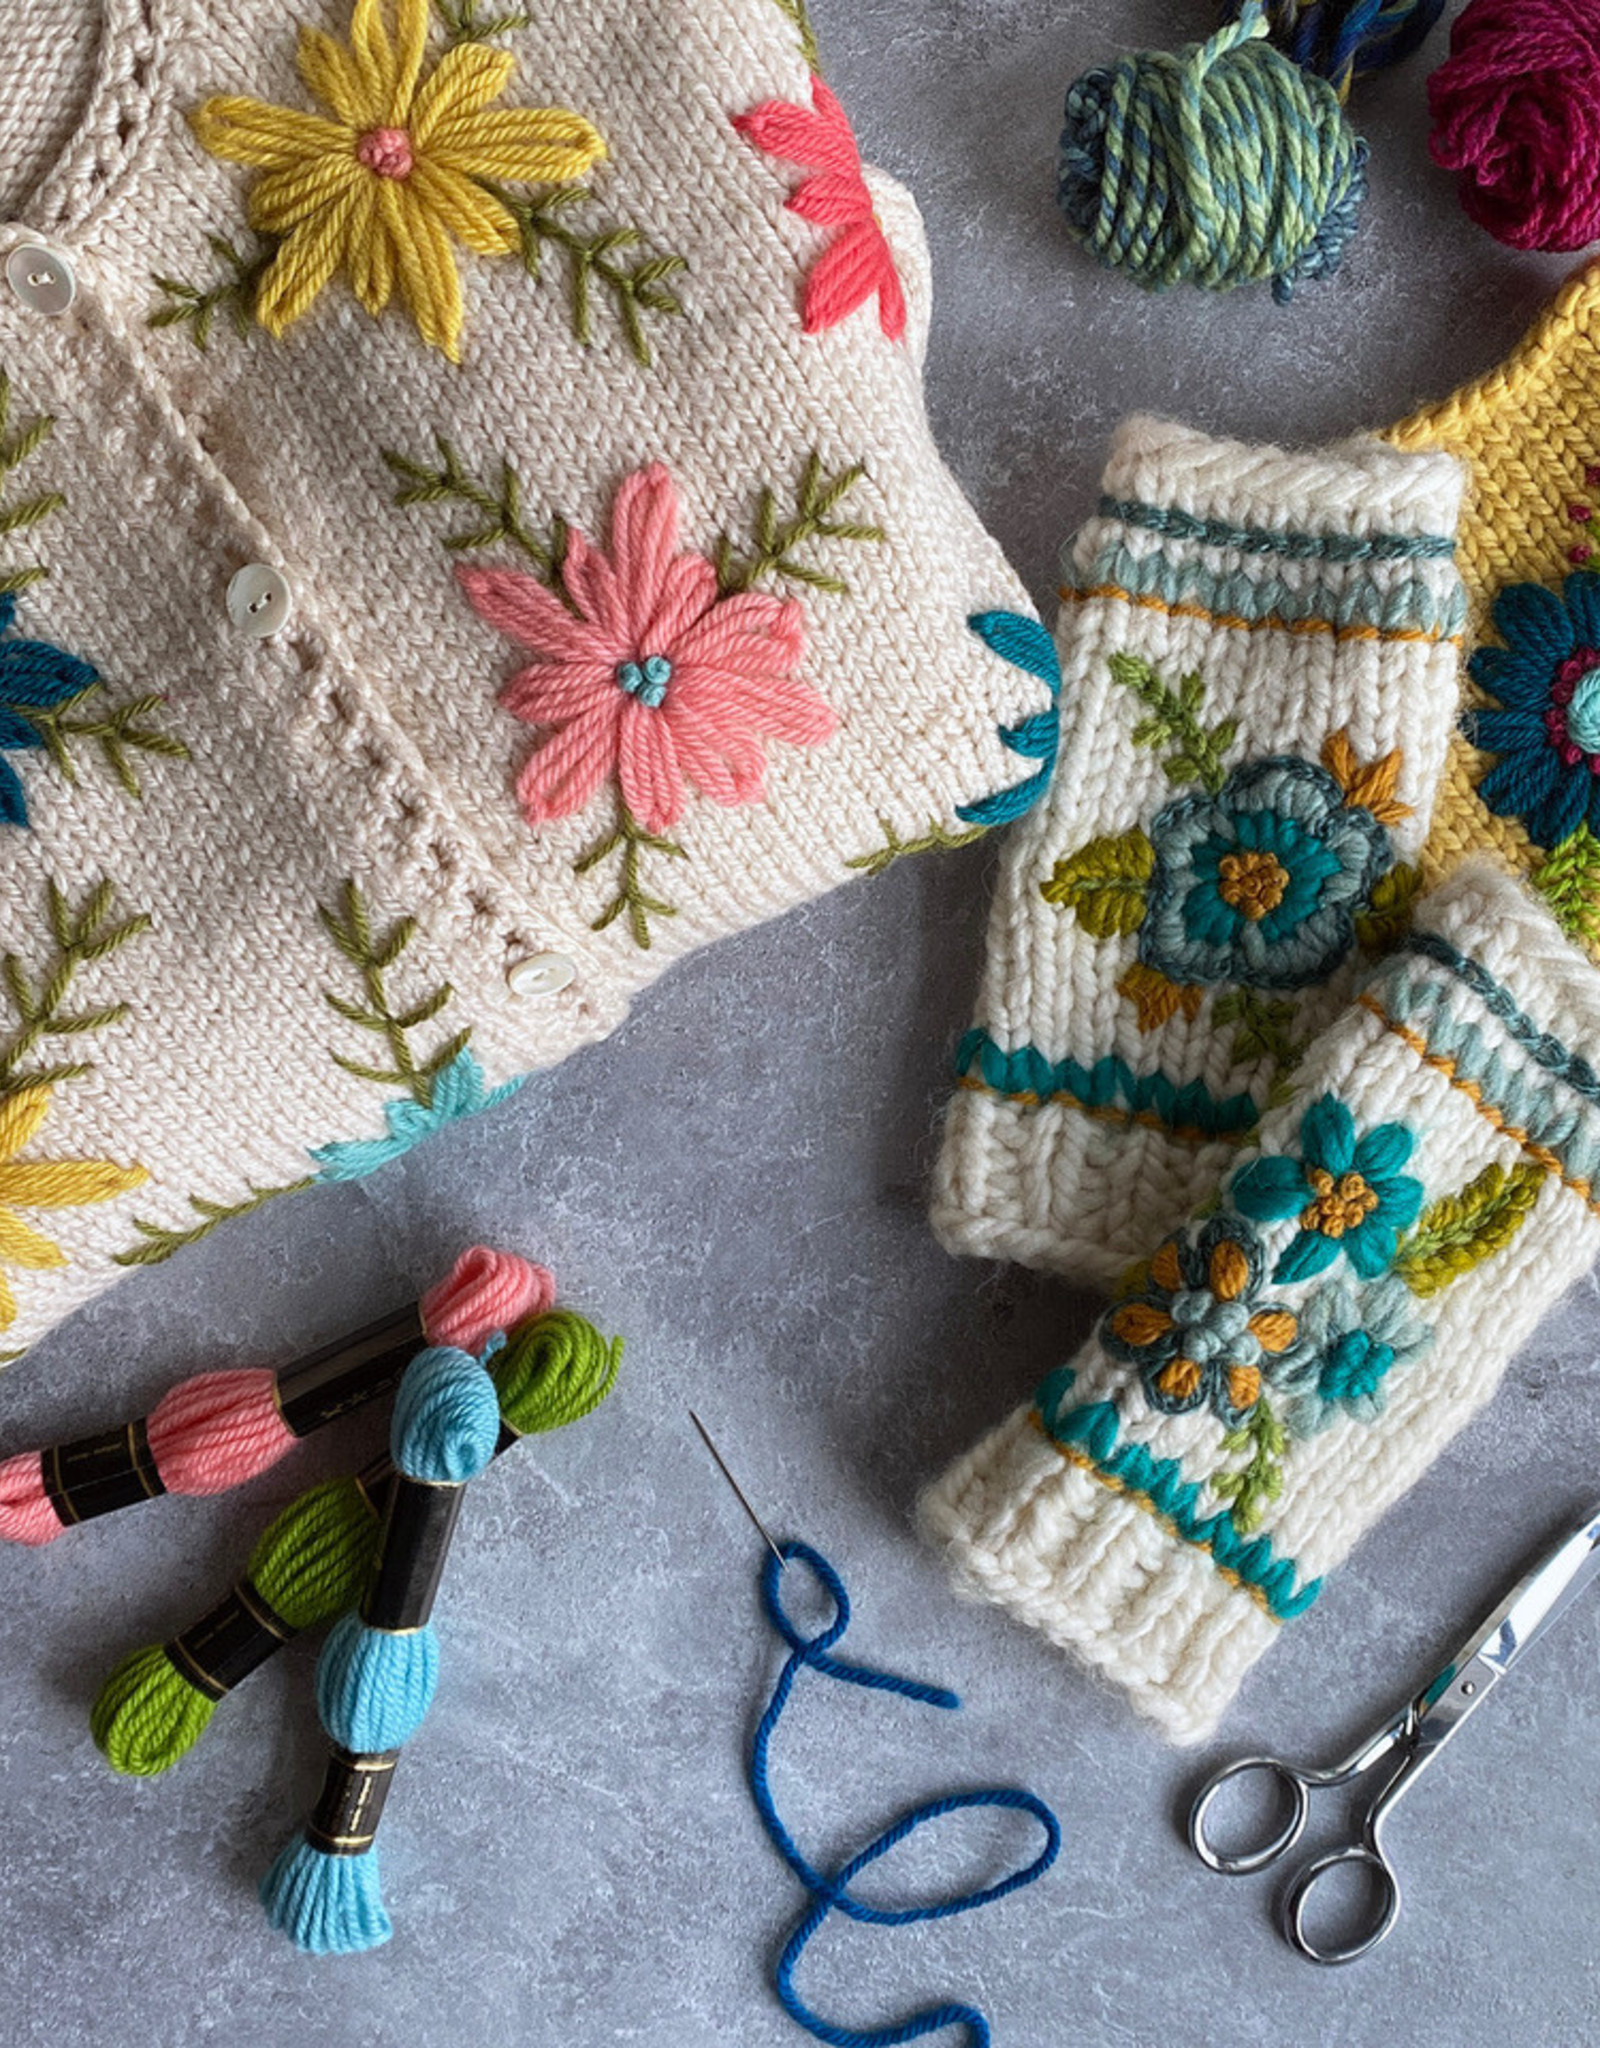 Embroider your Knitting with Betz White: SA Apr 15, 1-4 pm